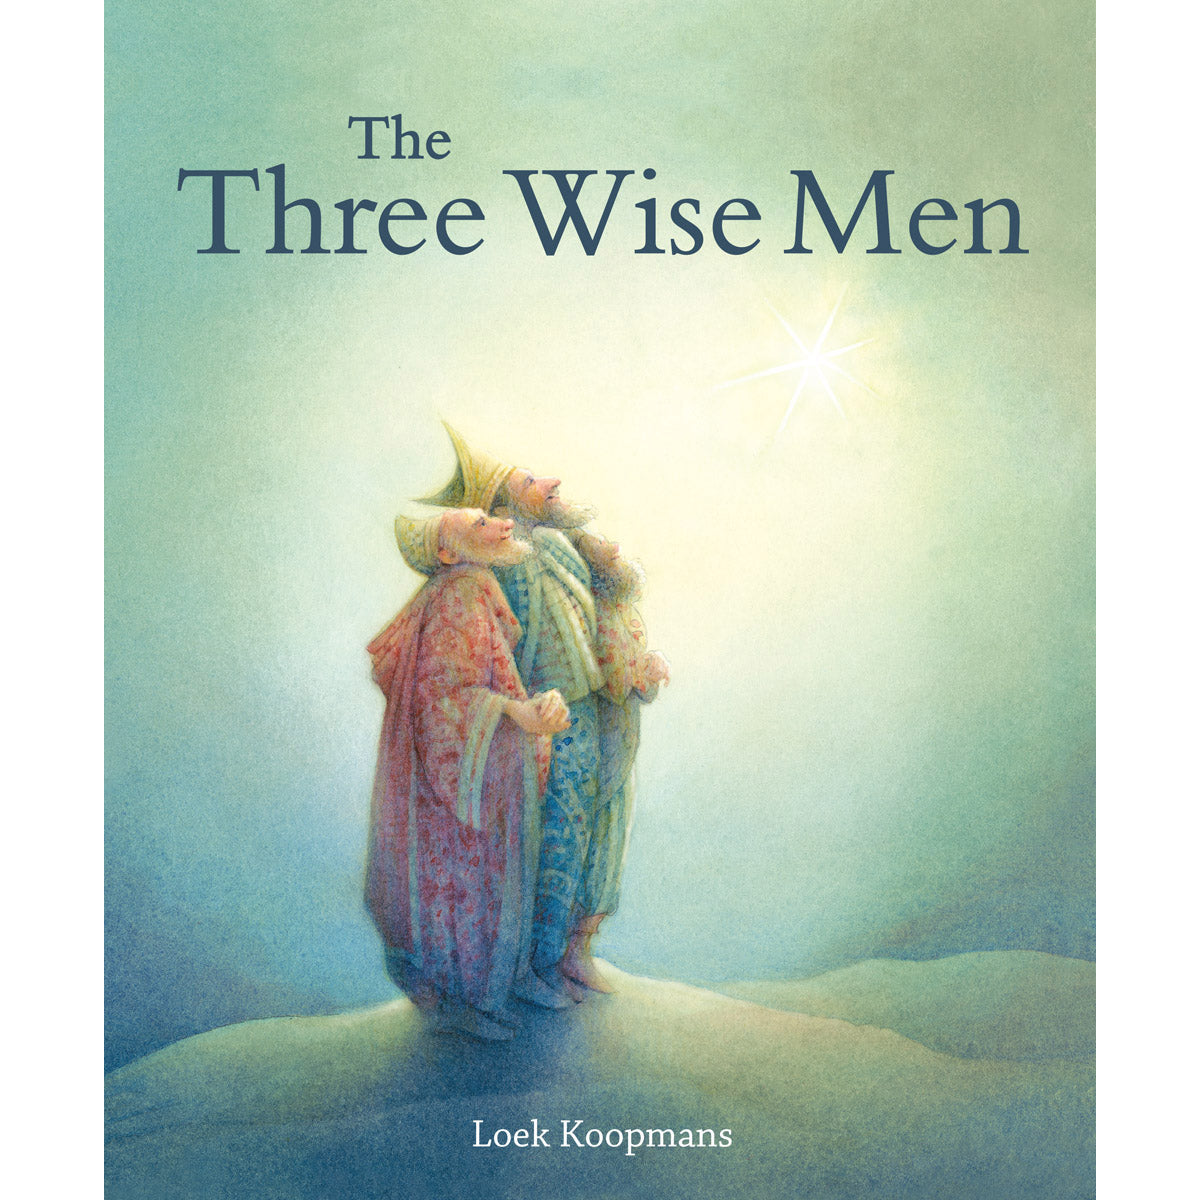 The Three Wise Men – A Christmas Story